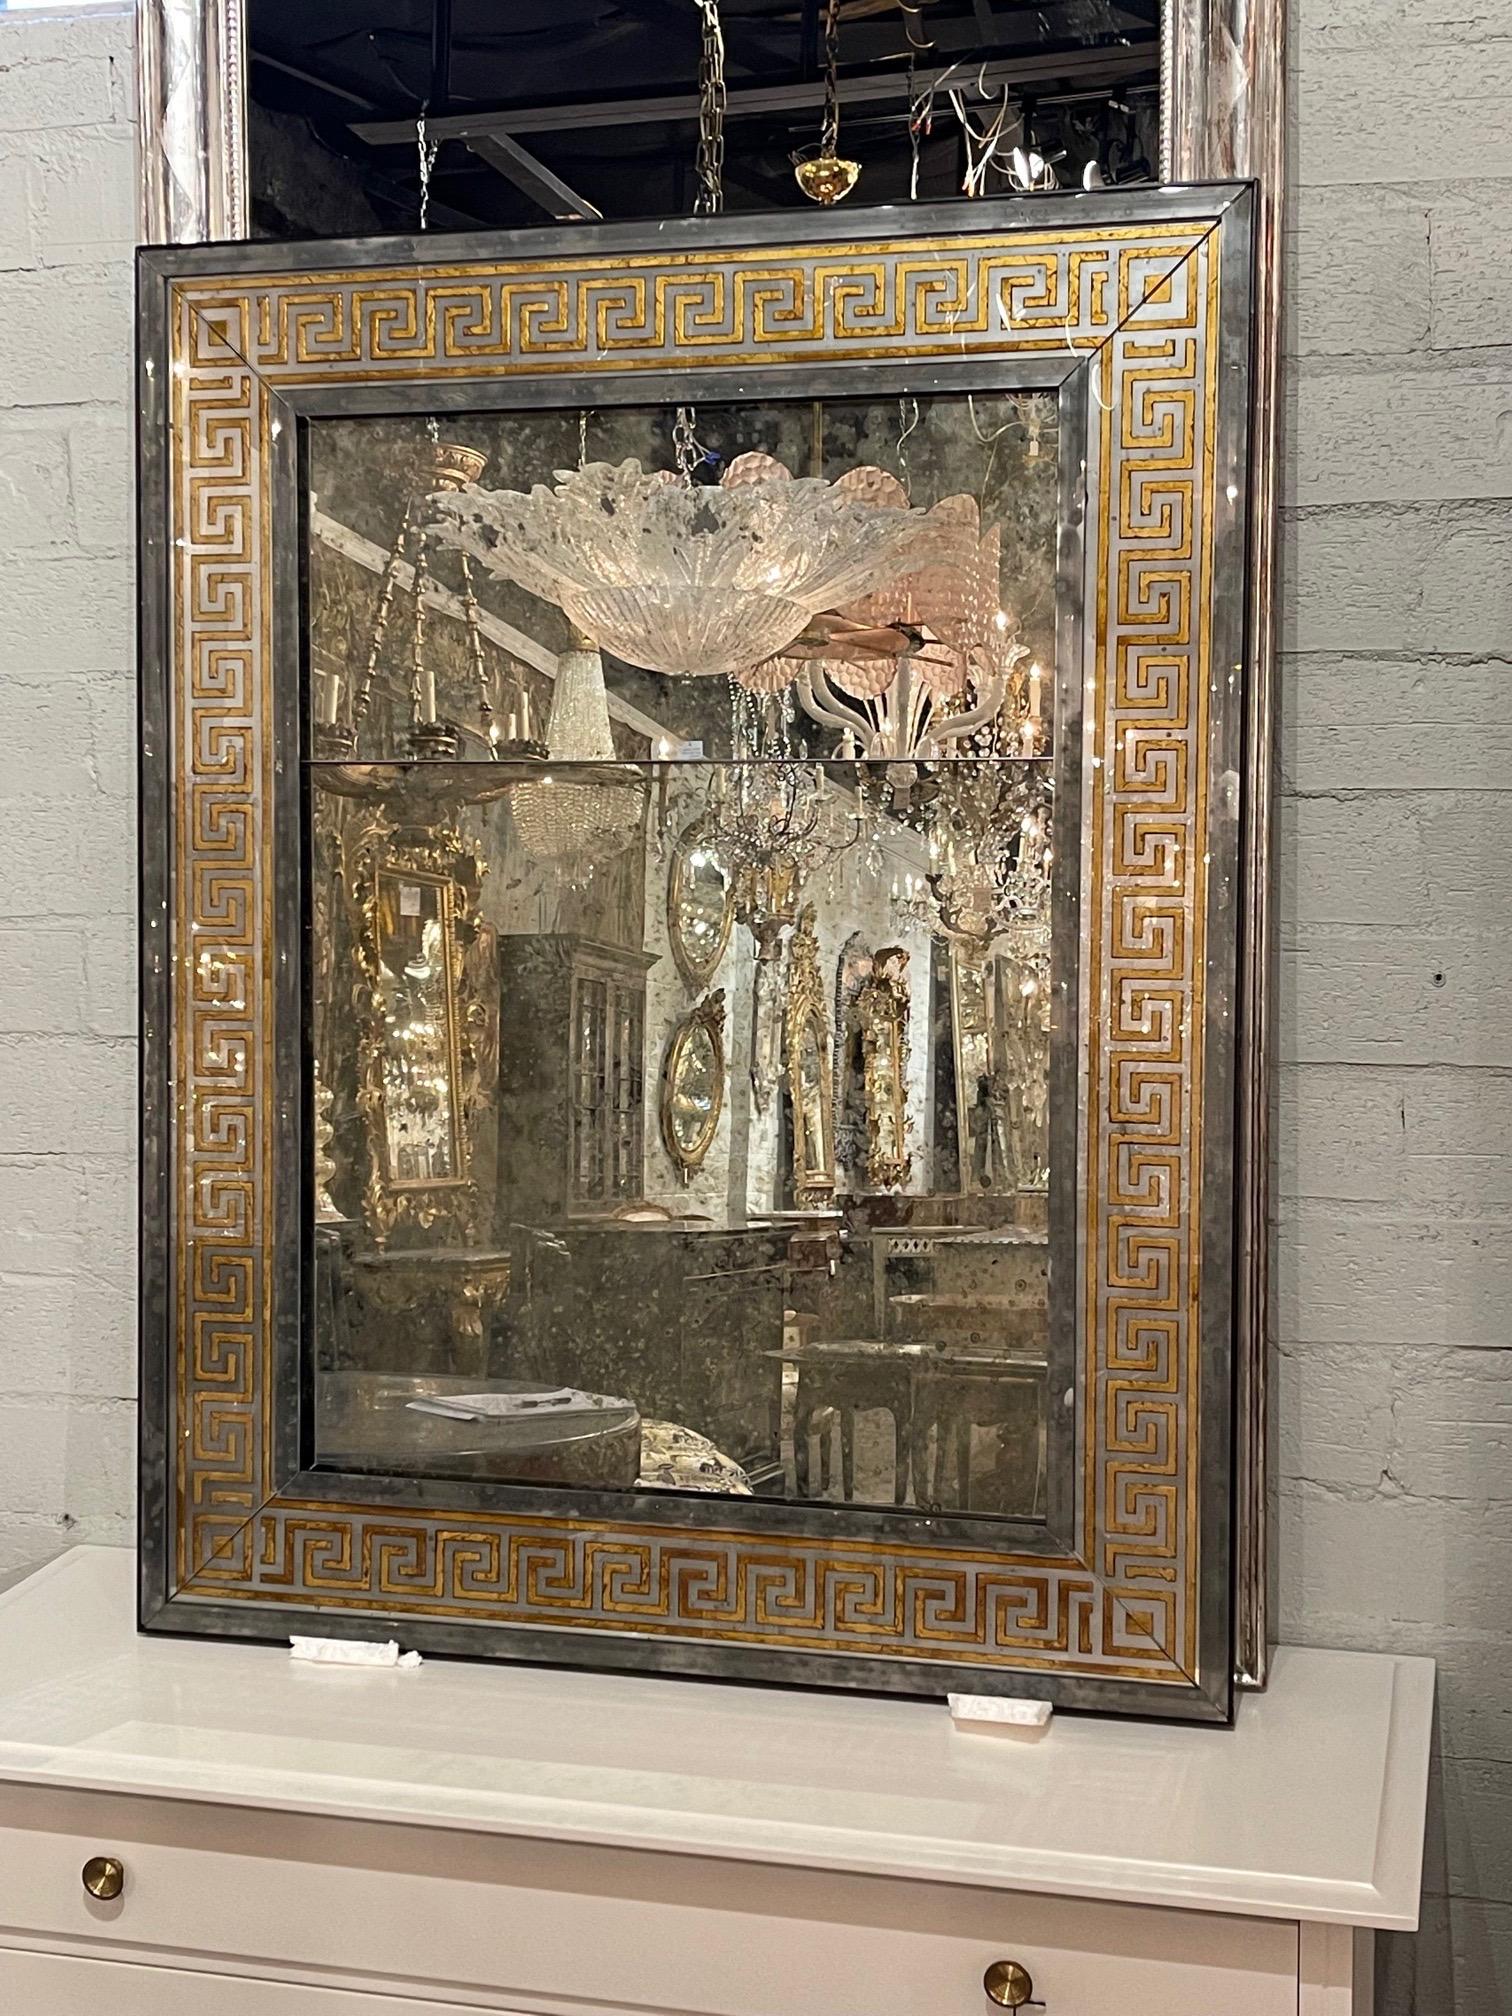 Fabulous French Jansen style distressed mirrors with eglomise Greek Key borders. Notice the divided glass on these and the beautiful patina! Makes a very stylish statement. Note price listed is per item.
Also there is a small crack on the top right